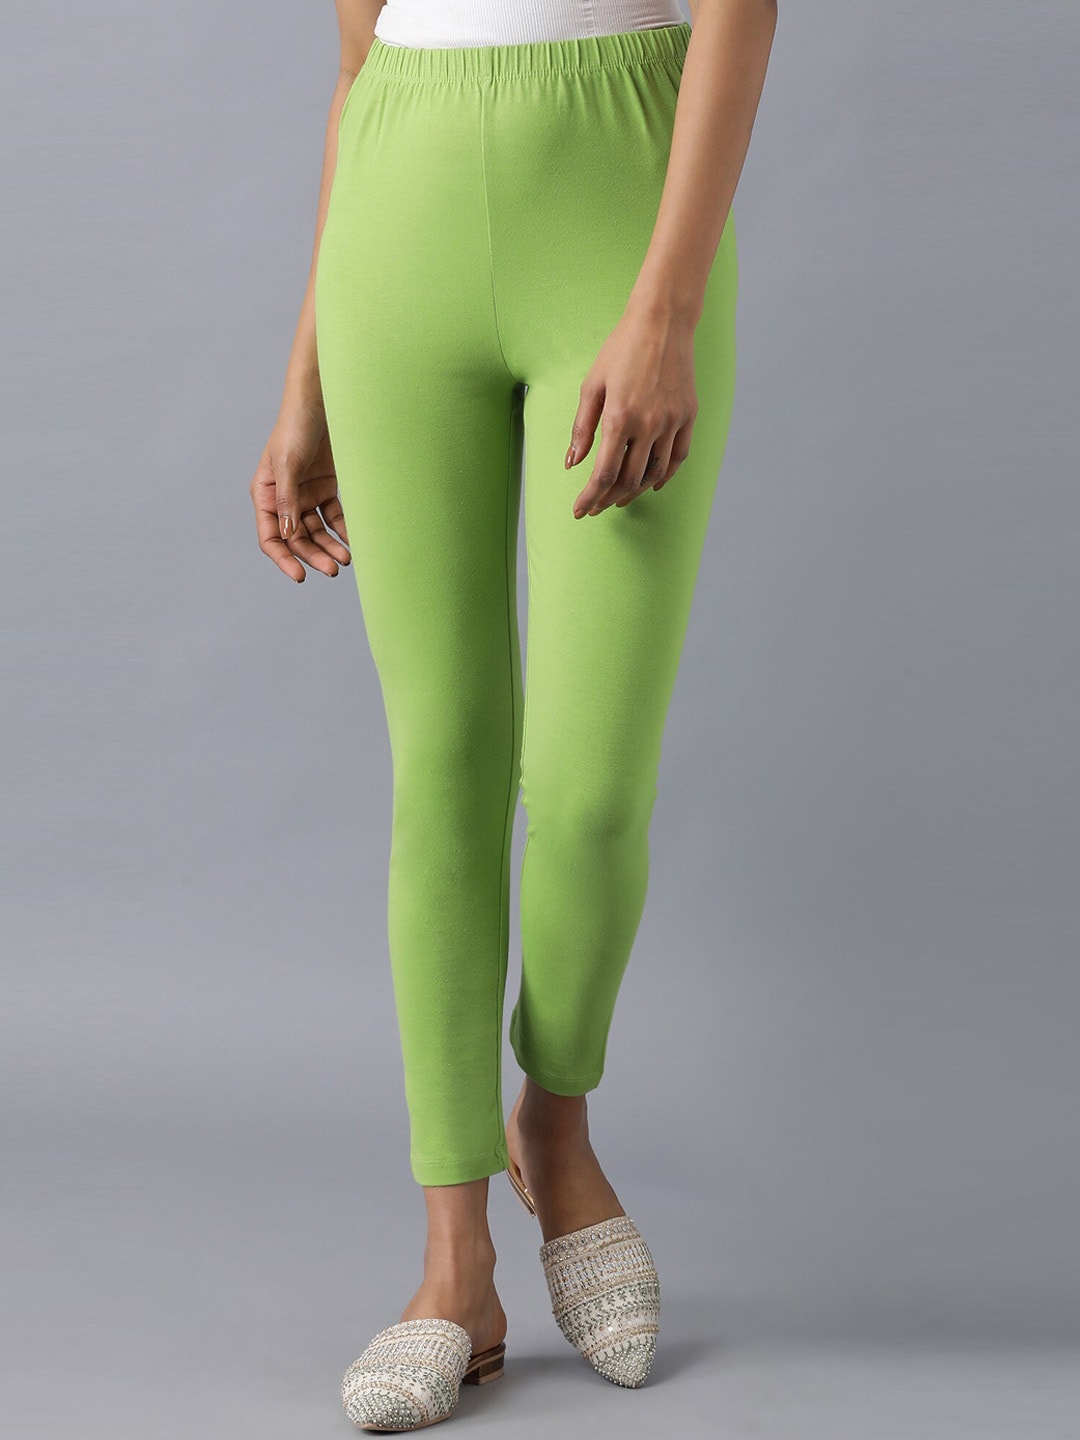 elleven Women Green Solid Ankle Length Leggings Price in India